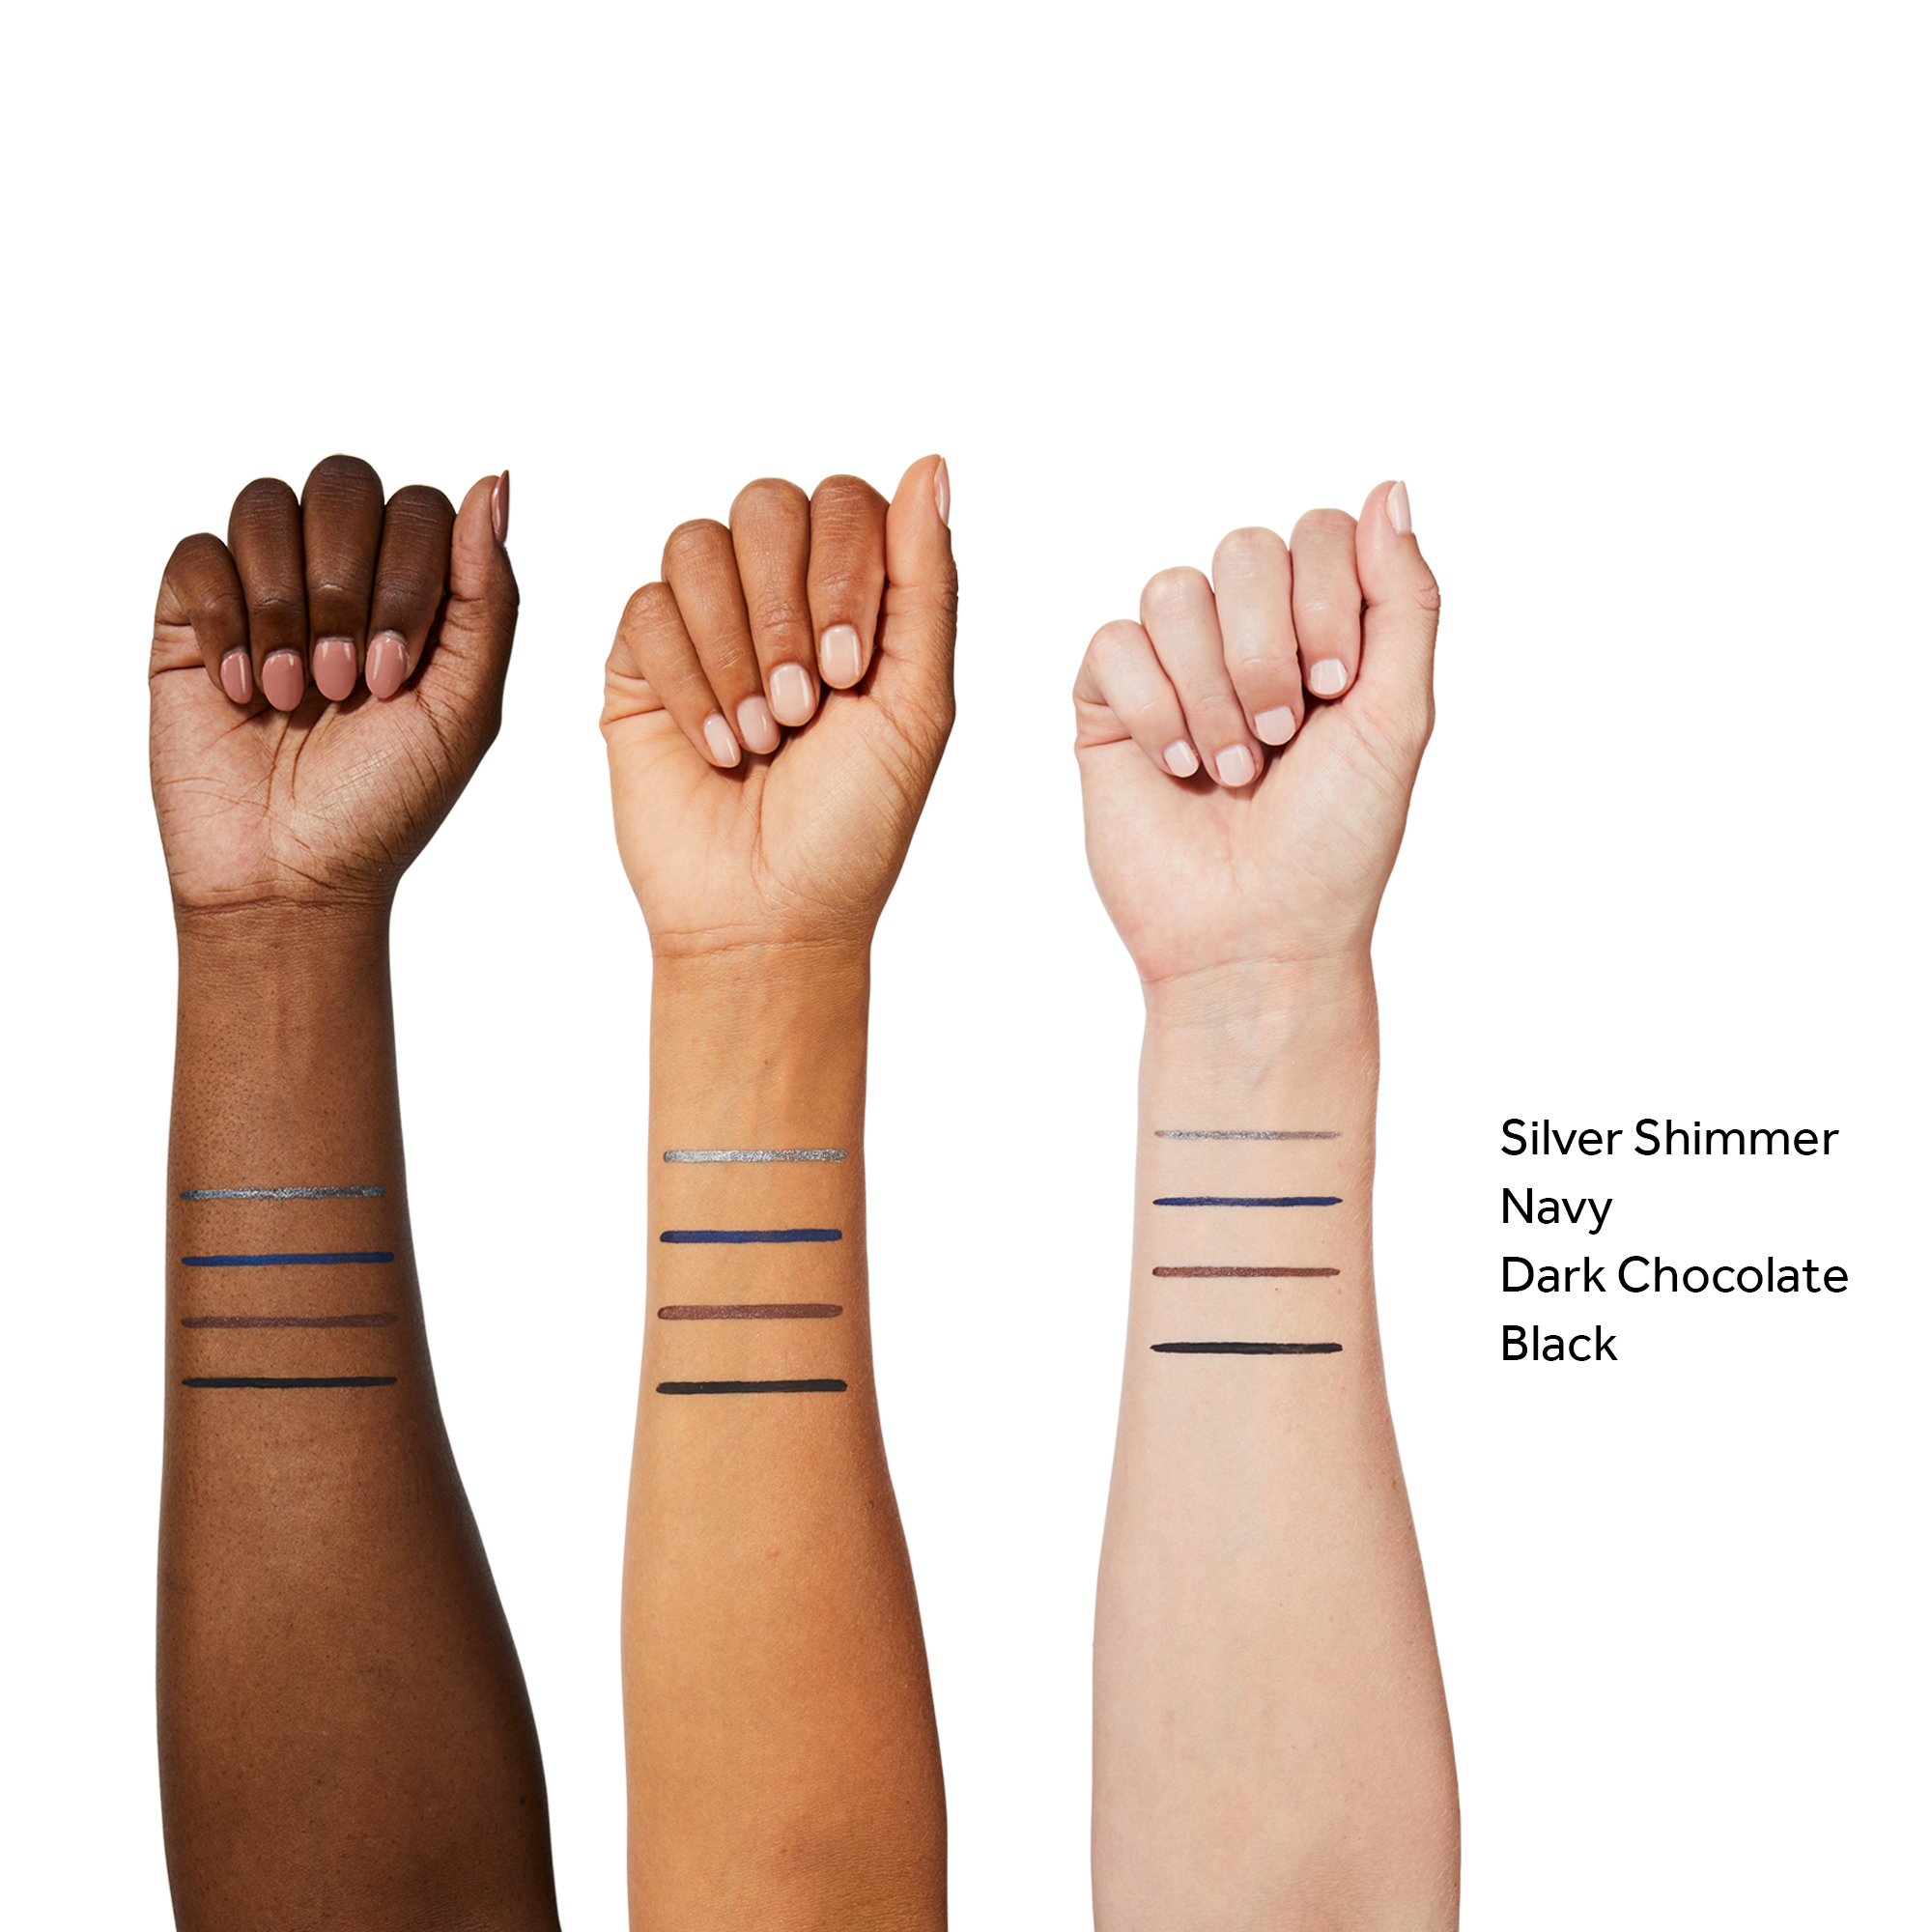 The image shows the different shades applied on arms with different skin tones. There are three arms in total and the shades are as follows, Silver Shimmer, Navy, Dark Chocolate and Black.e